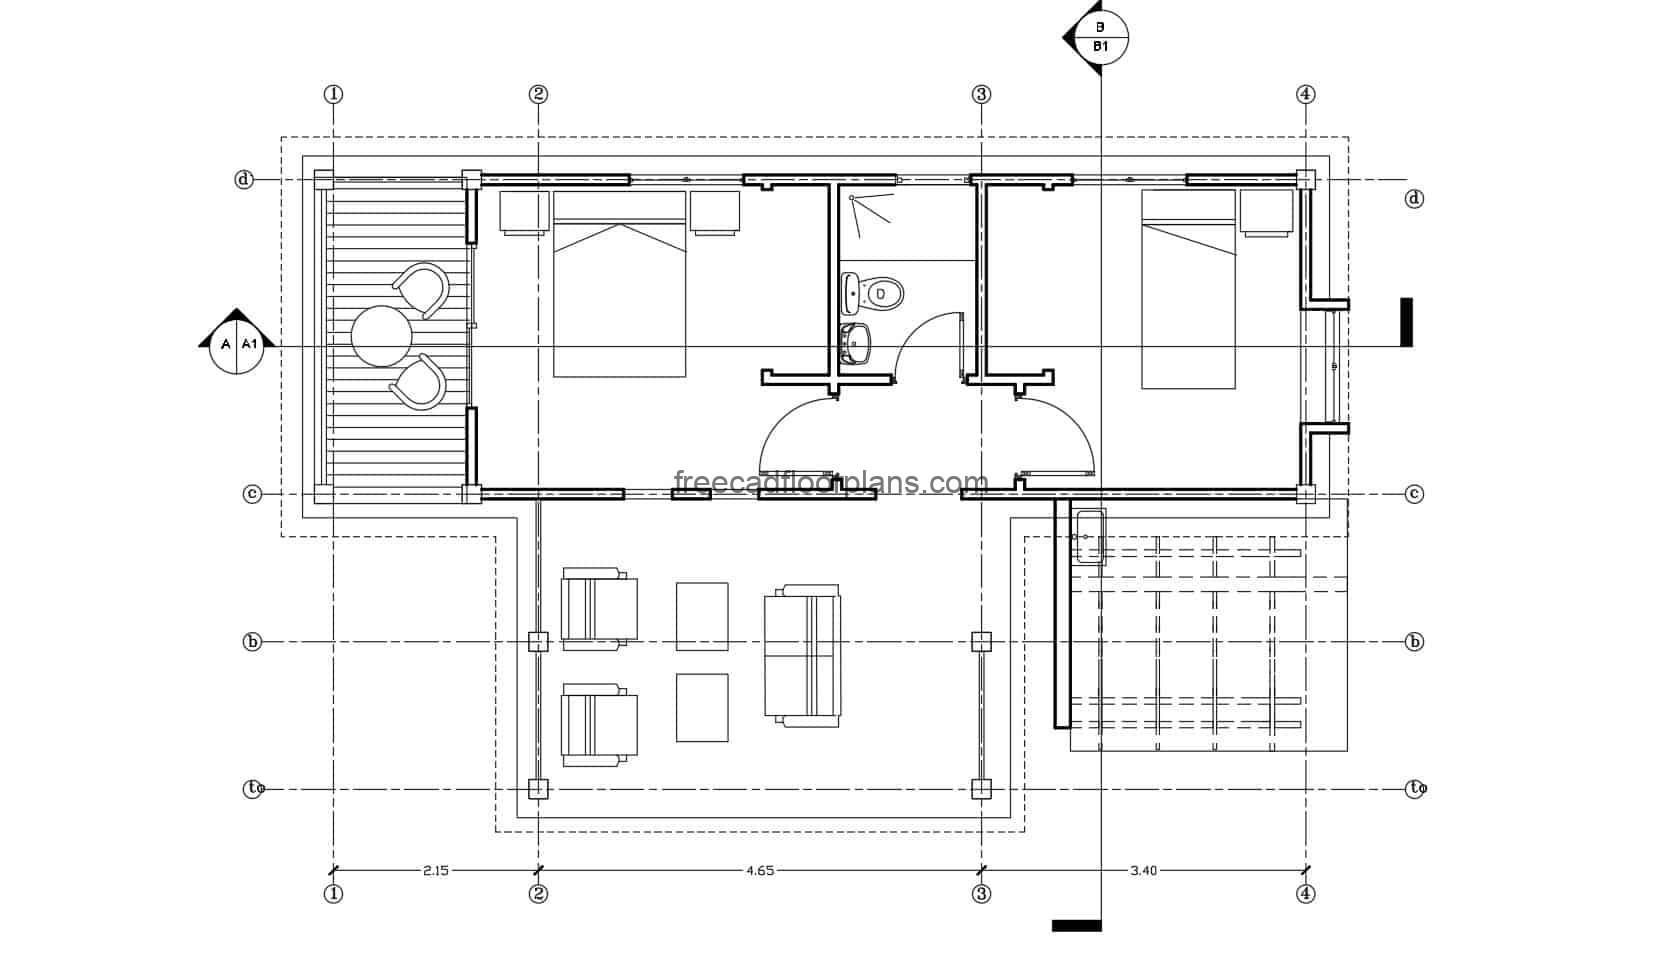 Bungalow house with two bedroom architectural DWG project